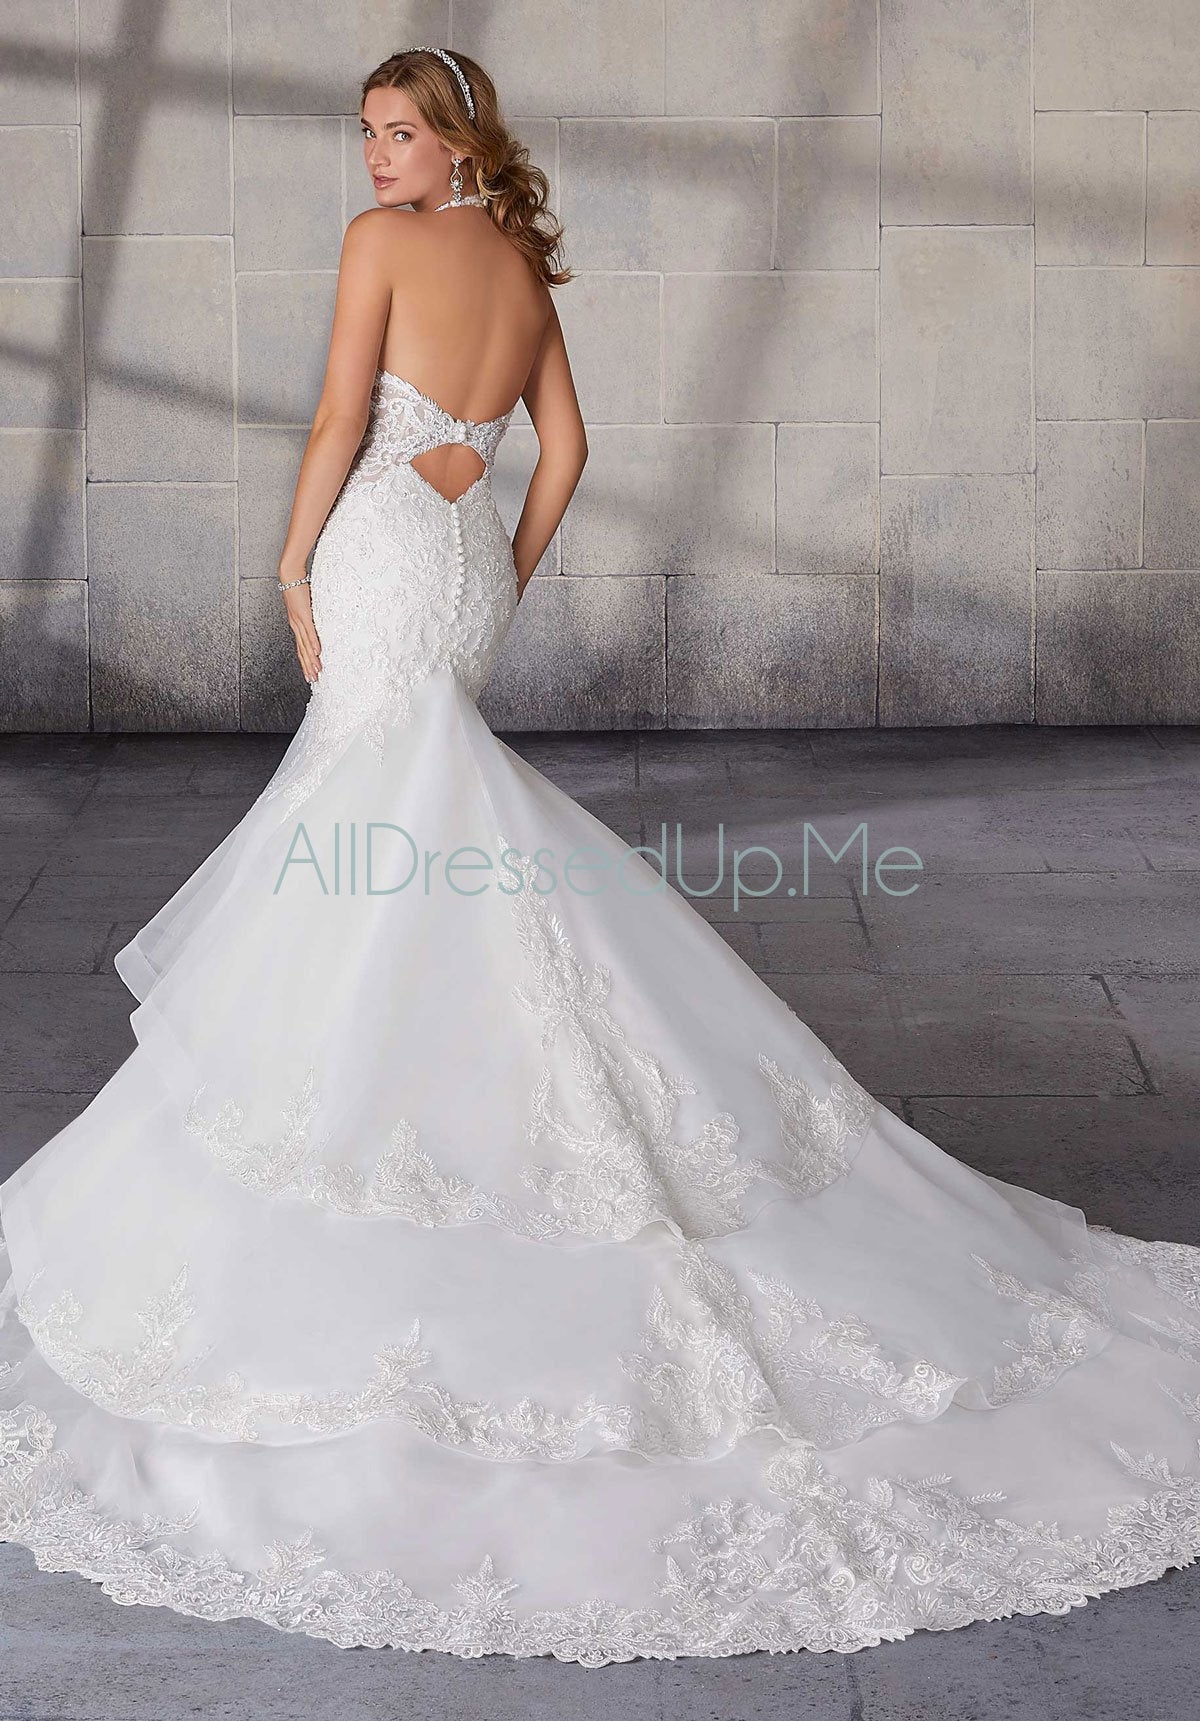 Morilee - Shakira - 2126 - Cheron's Bridal, Wedding Gown - Morilee Line - - Wedding Gowns Dresses Chattanooga Hixson Shops Boutiques Tennessee TN Georgia GA MSRP Lowest Prices Sale Discount